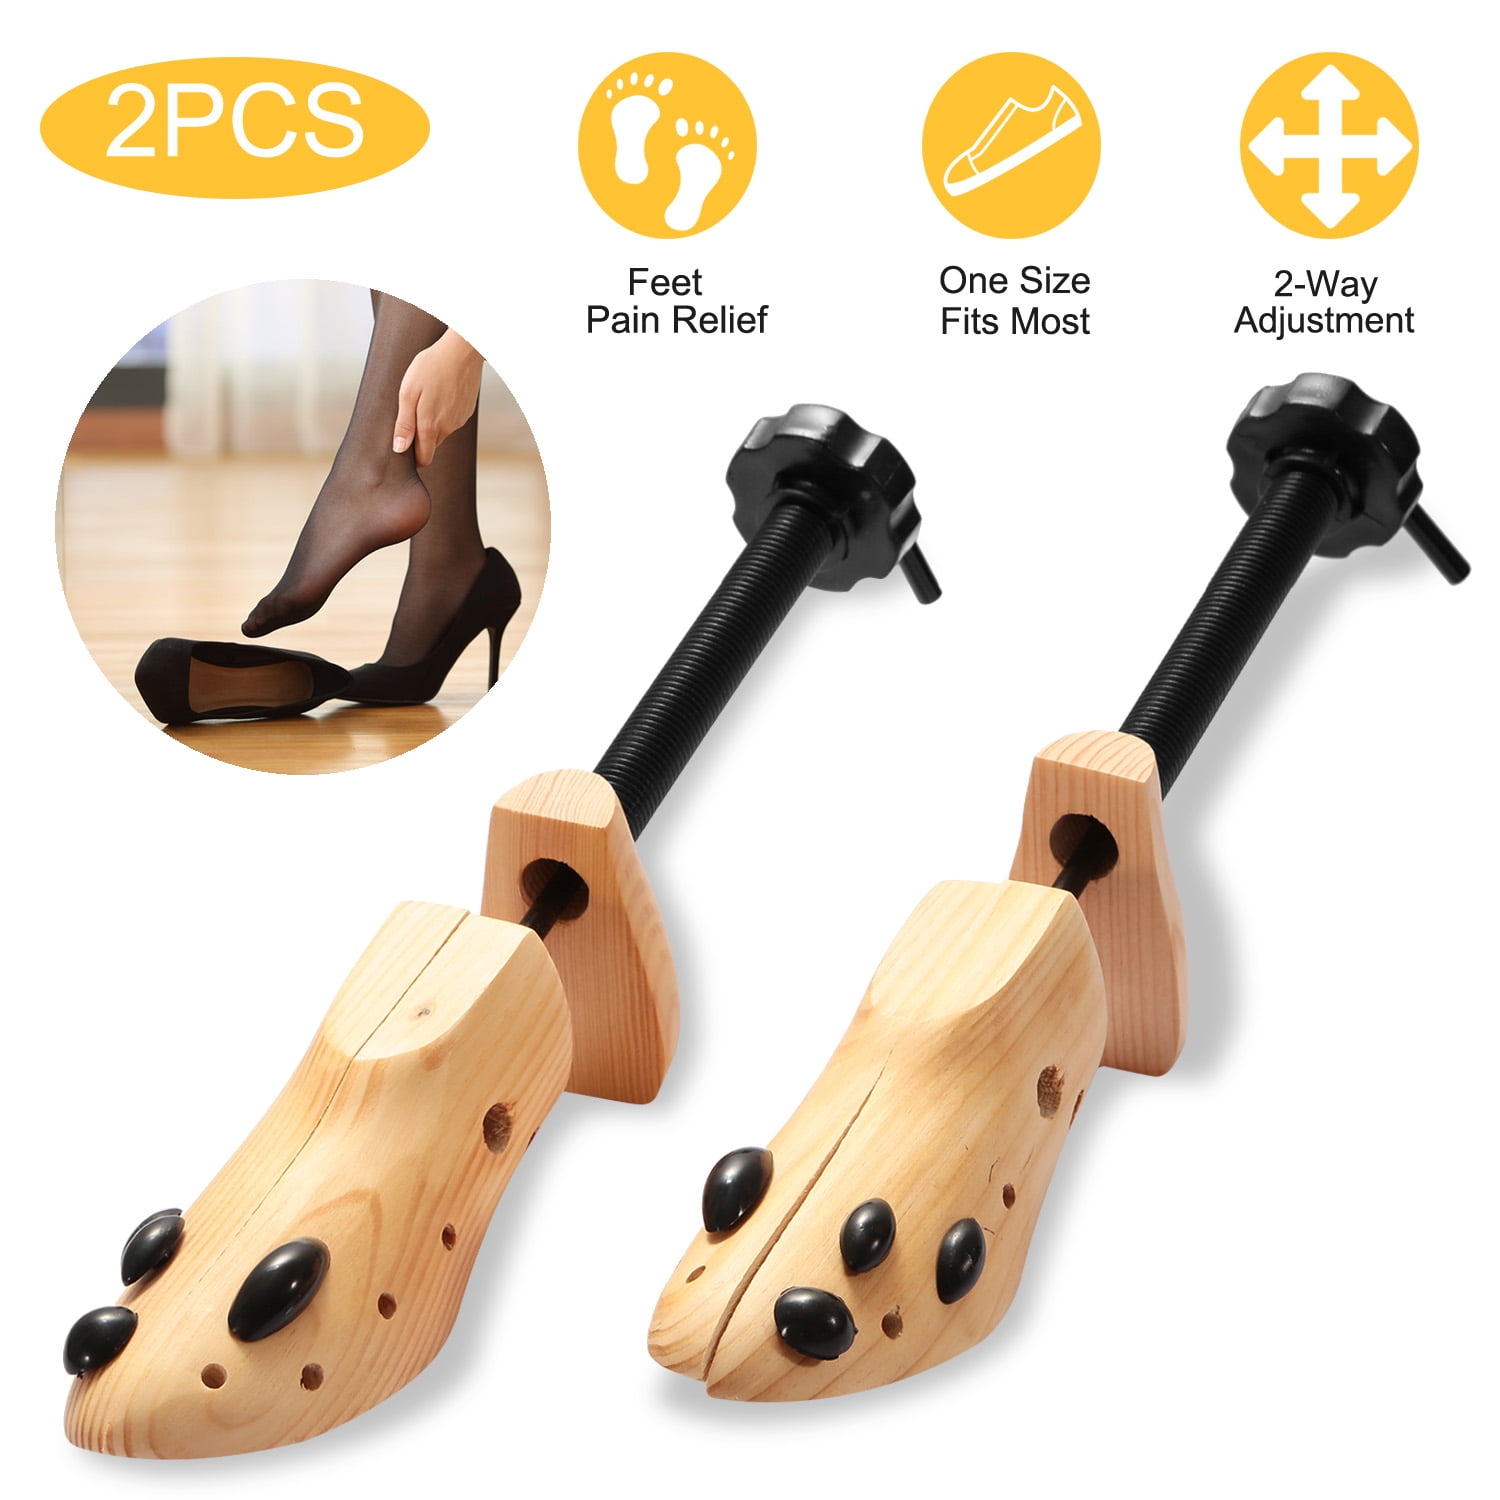 Wooden 2-Way Shoe Stretcher Adjustable Length and Width For Men And Women D 